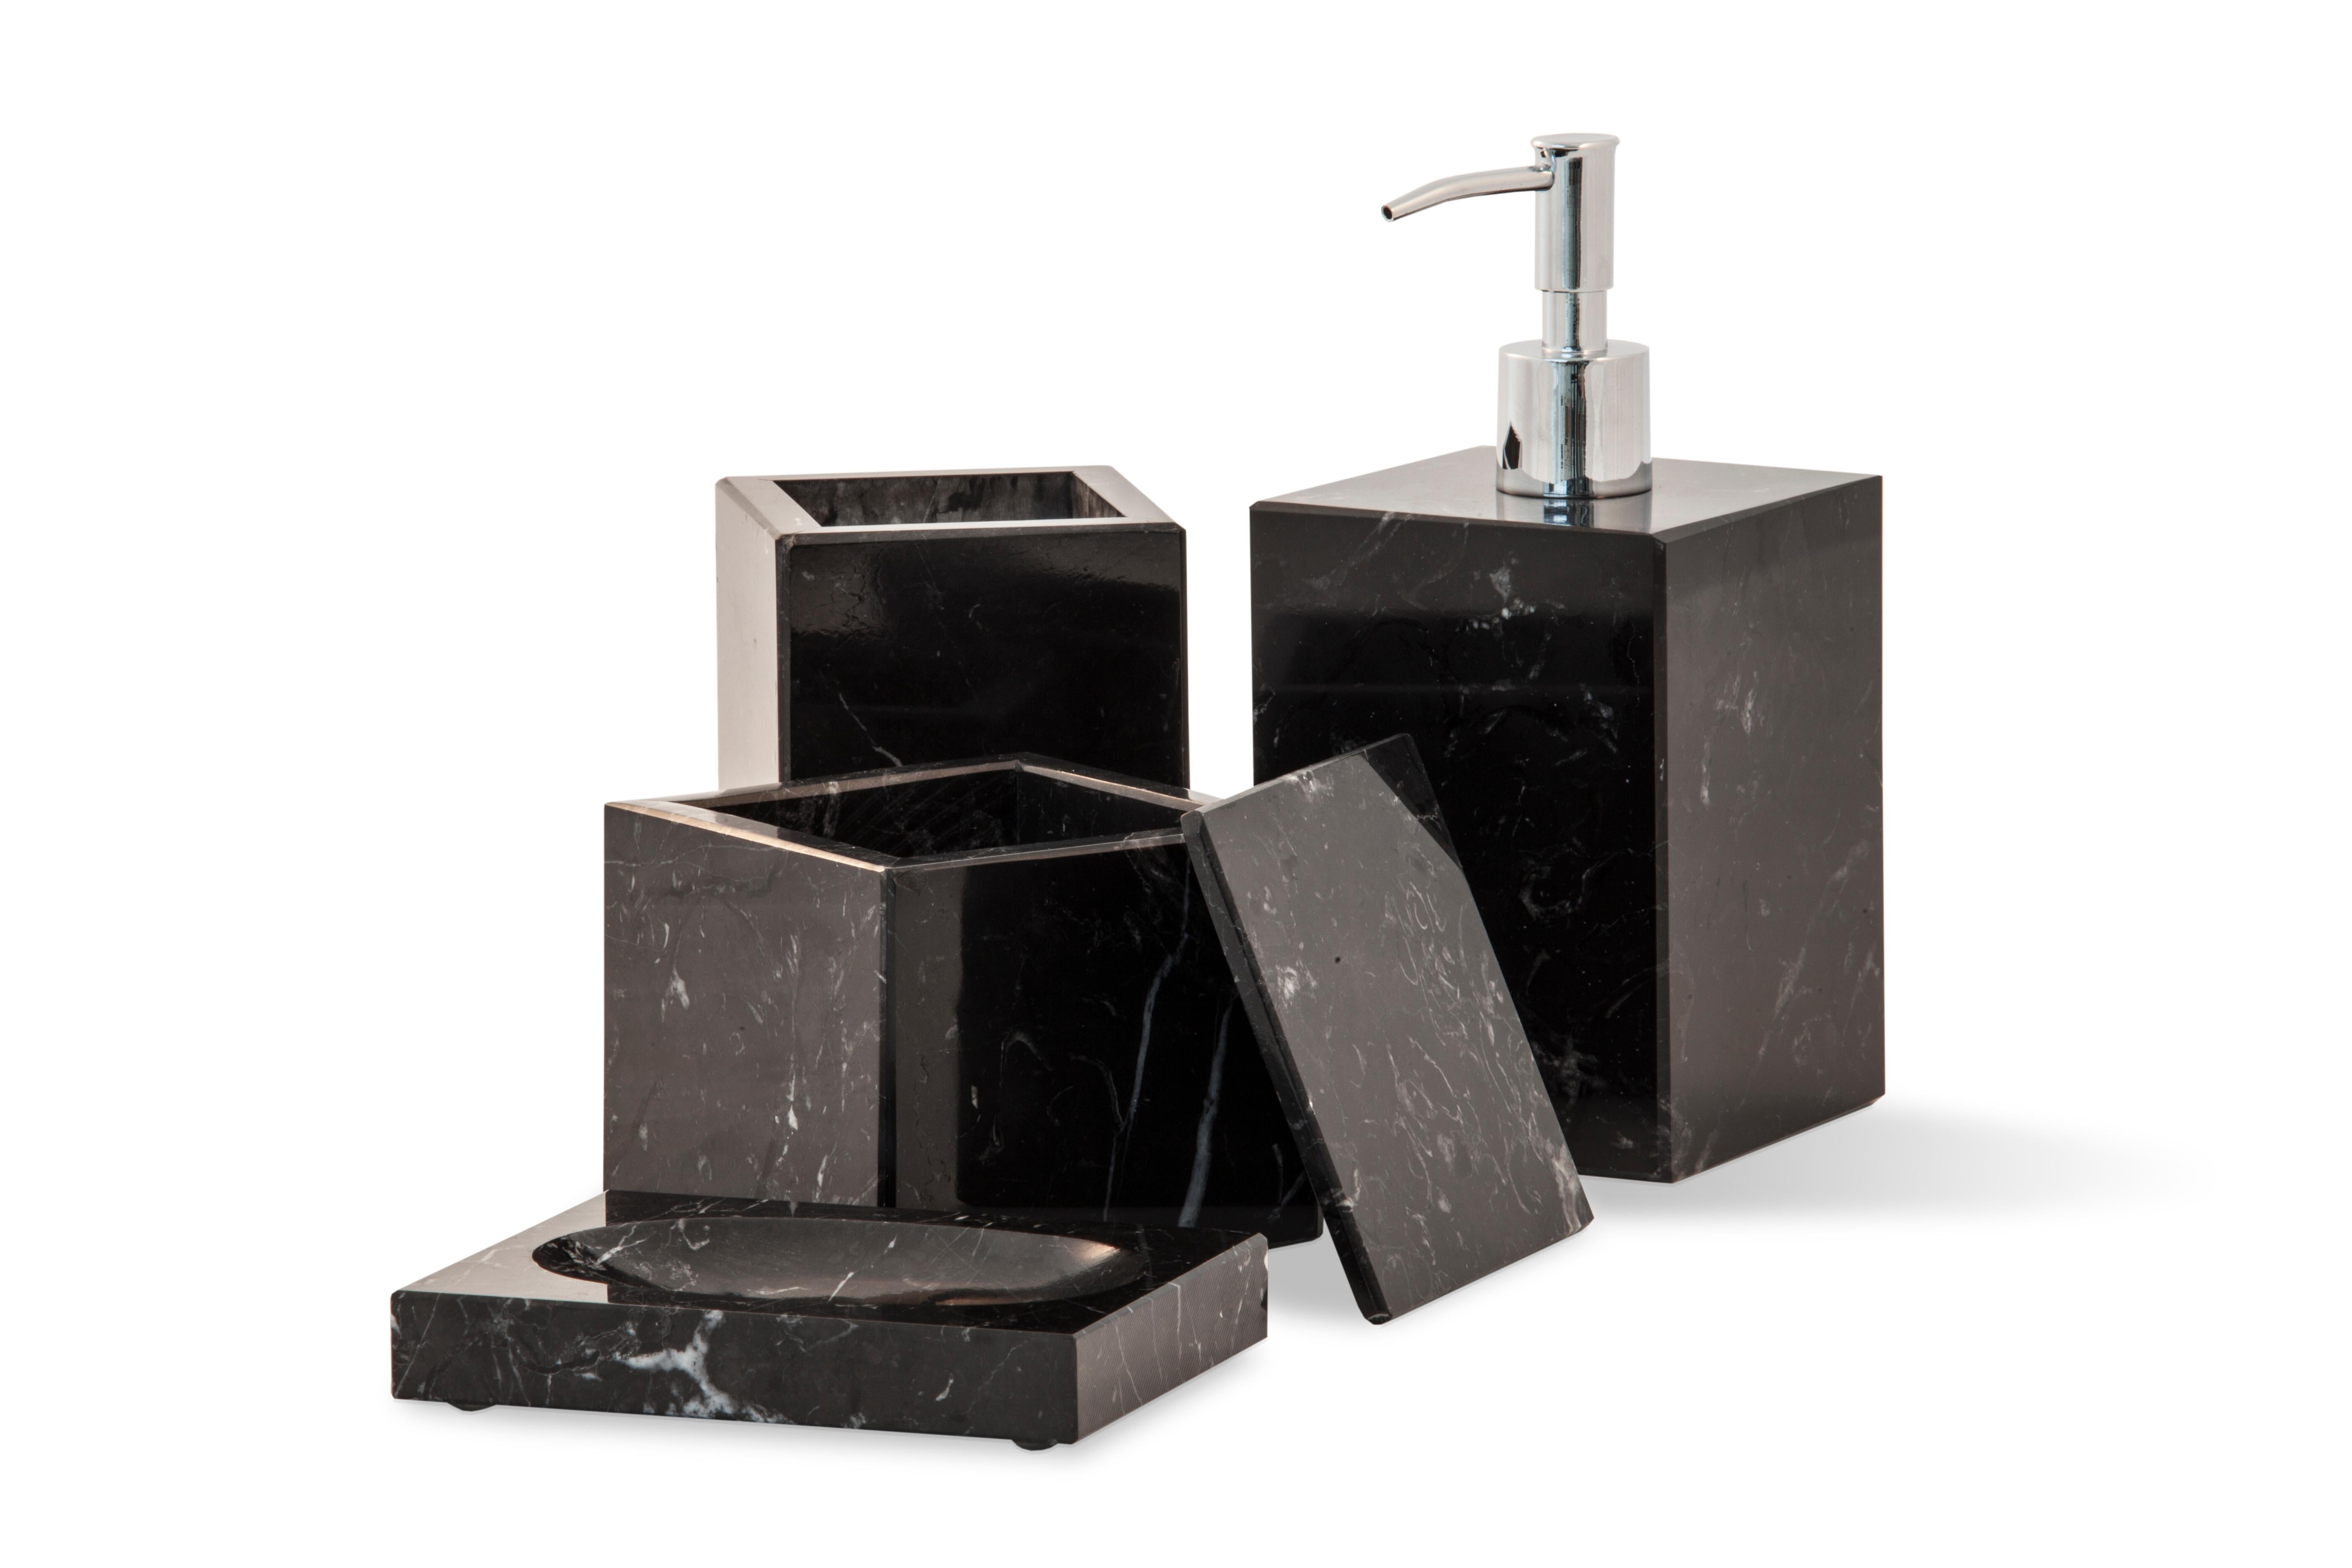 Squared shape soap dispenser in black Marquina marble with dispenser pump in stainless steel.
Each piece is in a way unique (since each marble block is different in veins and shades) and handcrafted in Italy. Slight variations in shape, color and